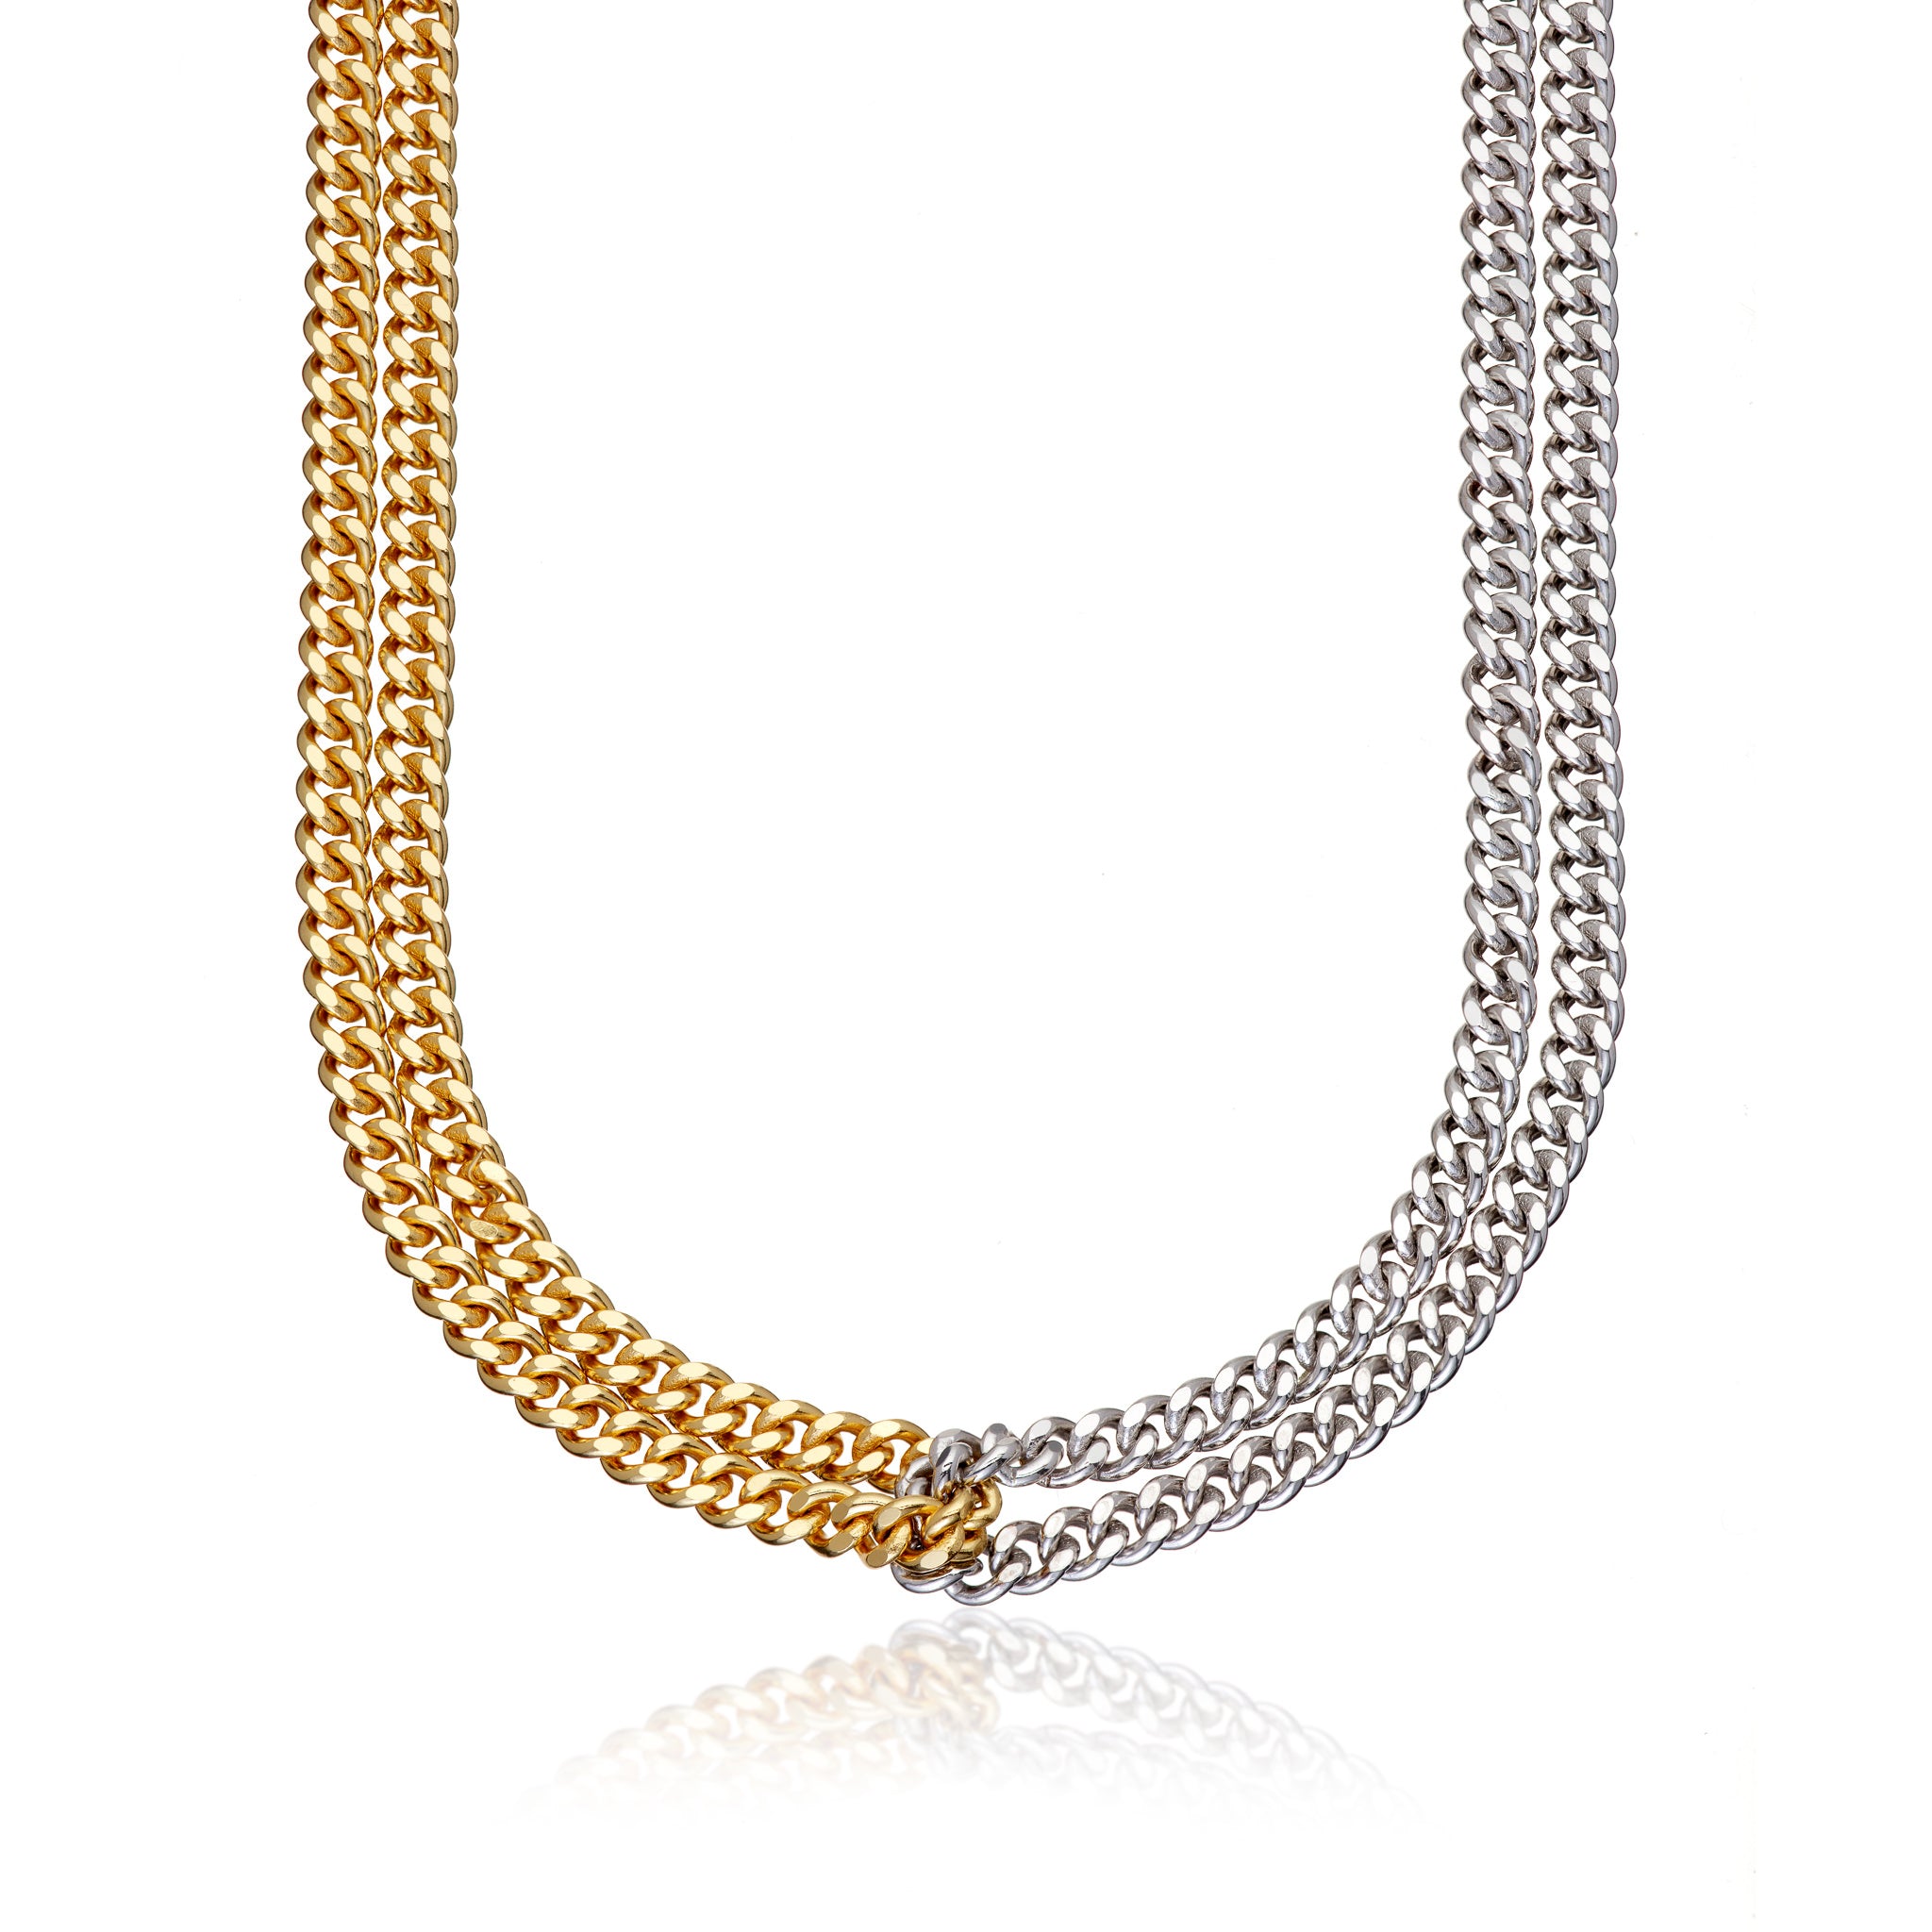 Mixed Metal Curb Chain Looped Necklace by Scream Pretty